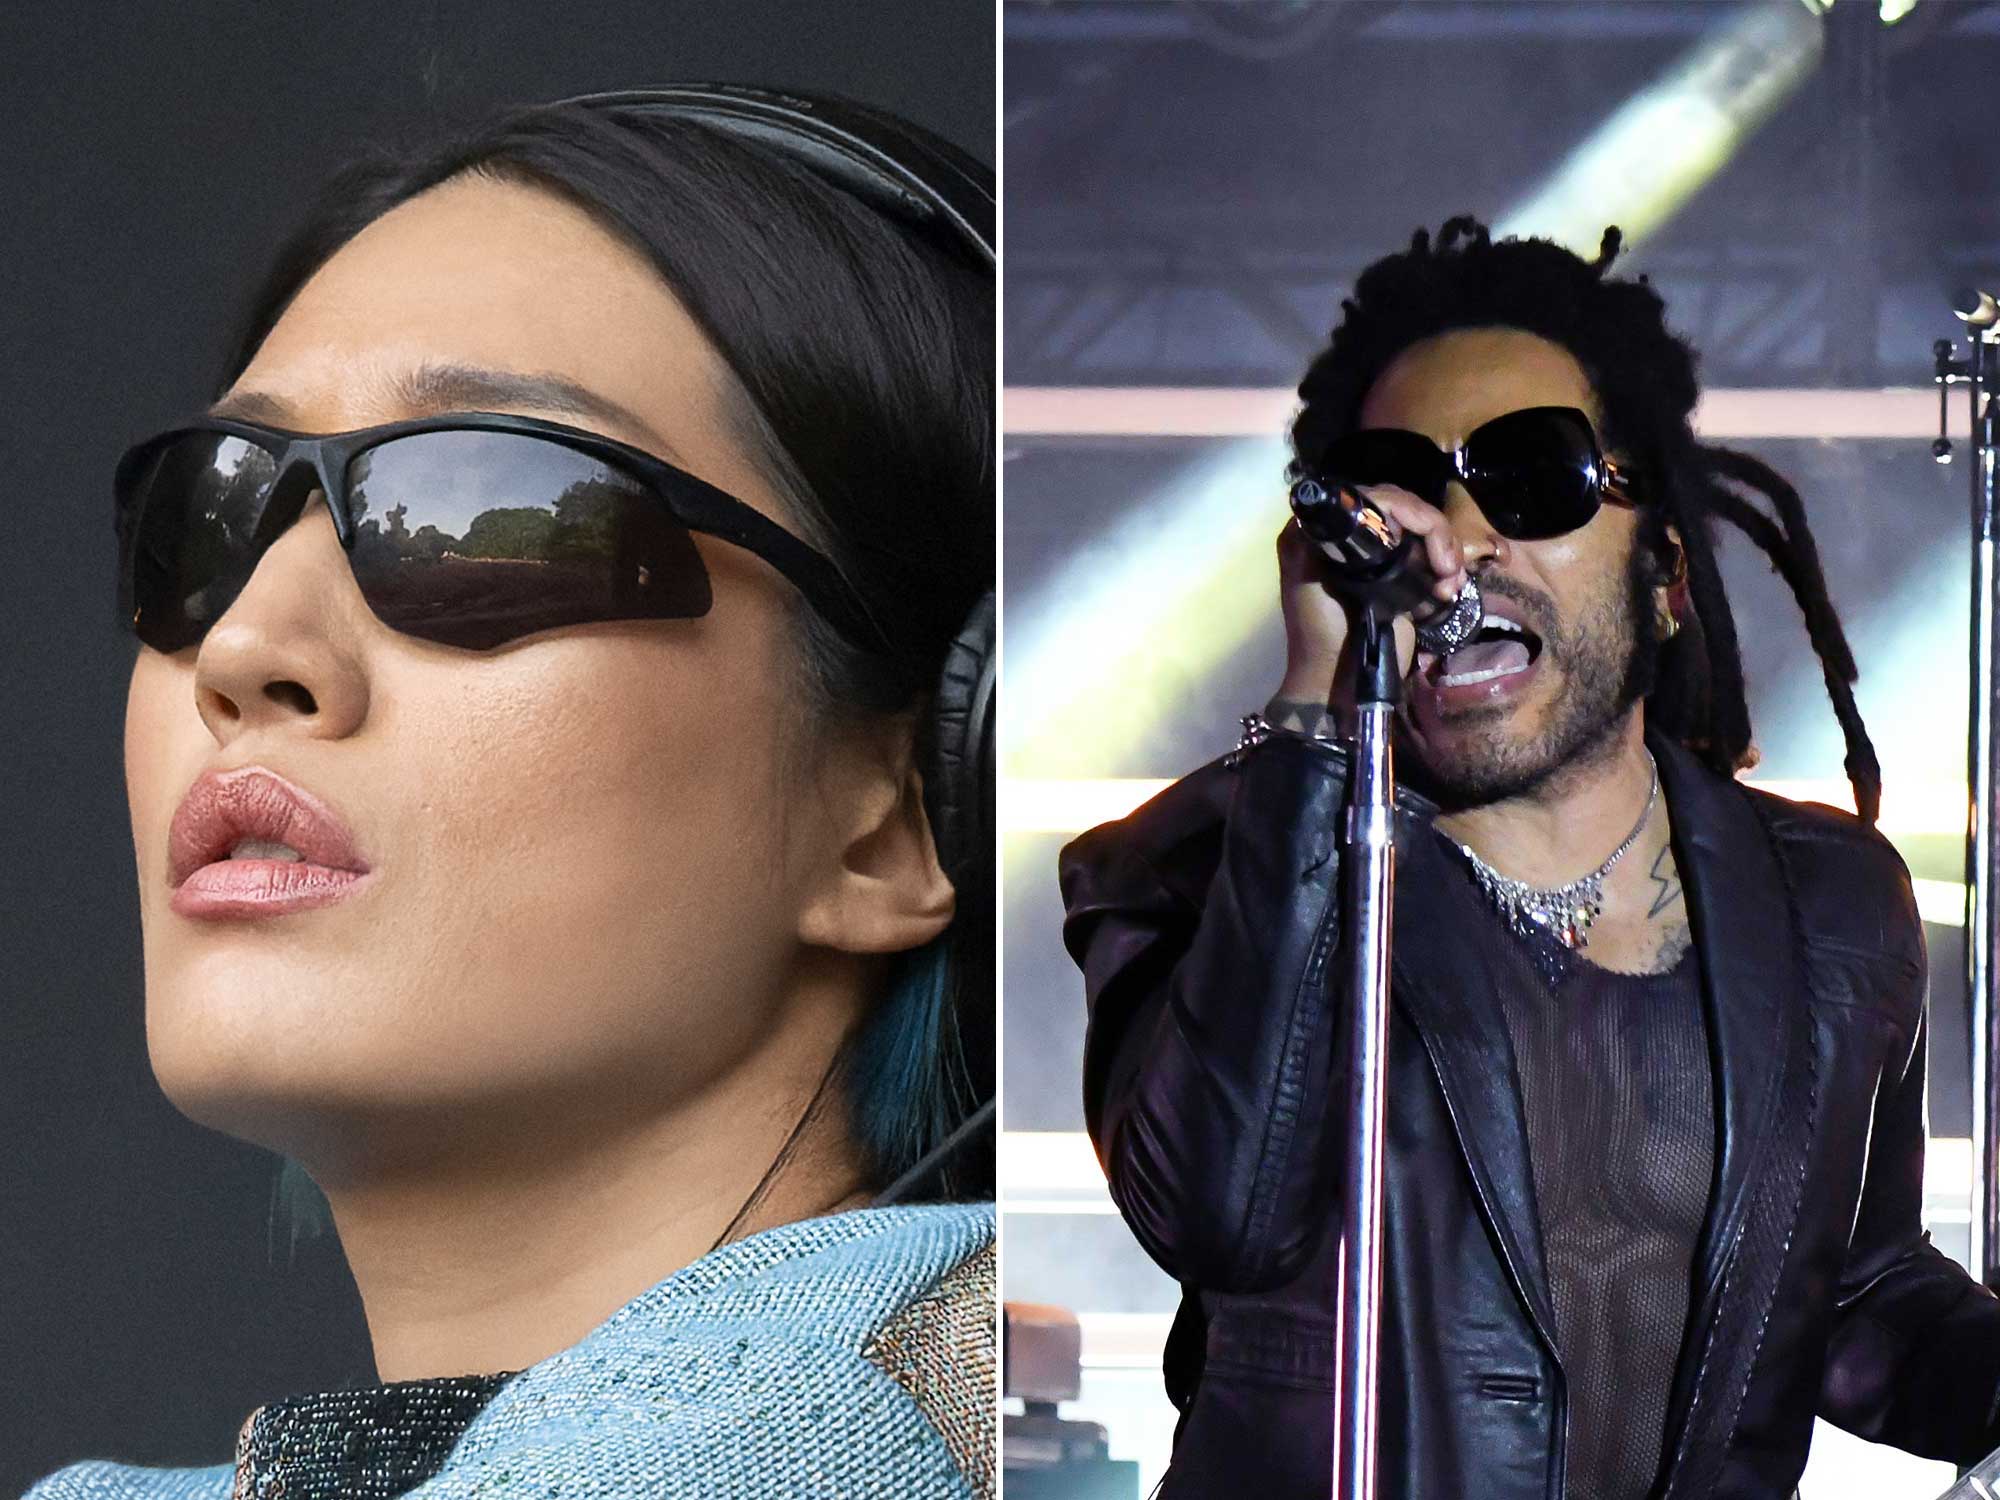 South Korean DJ Peggy Gou performs on stage on June 9, 2023 during the music festival 'South of the Sun' in Soendermarken park, Frederiksberg area of Copenhagen. & Lenny Kravitz performs onstage during the 2023 LACMA Art+Film Gala, Presented By Gucci at Los Angeles County Museum of Art on November 04, 2023 in Los Angeles, California.